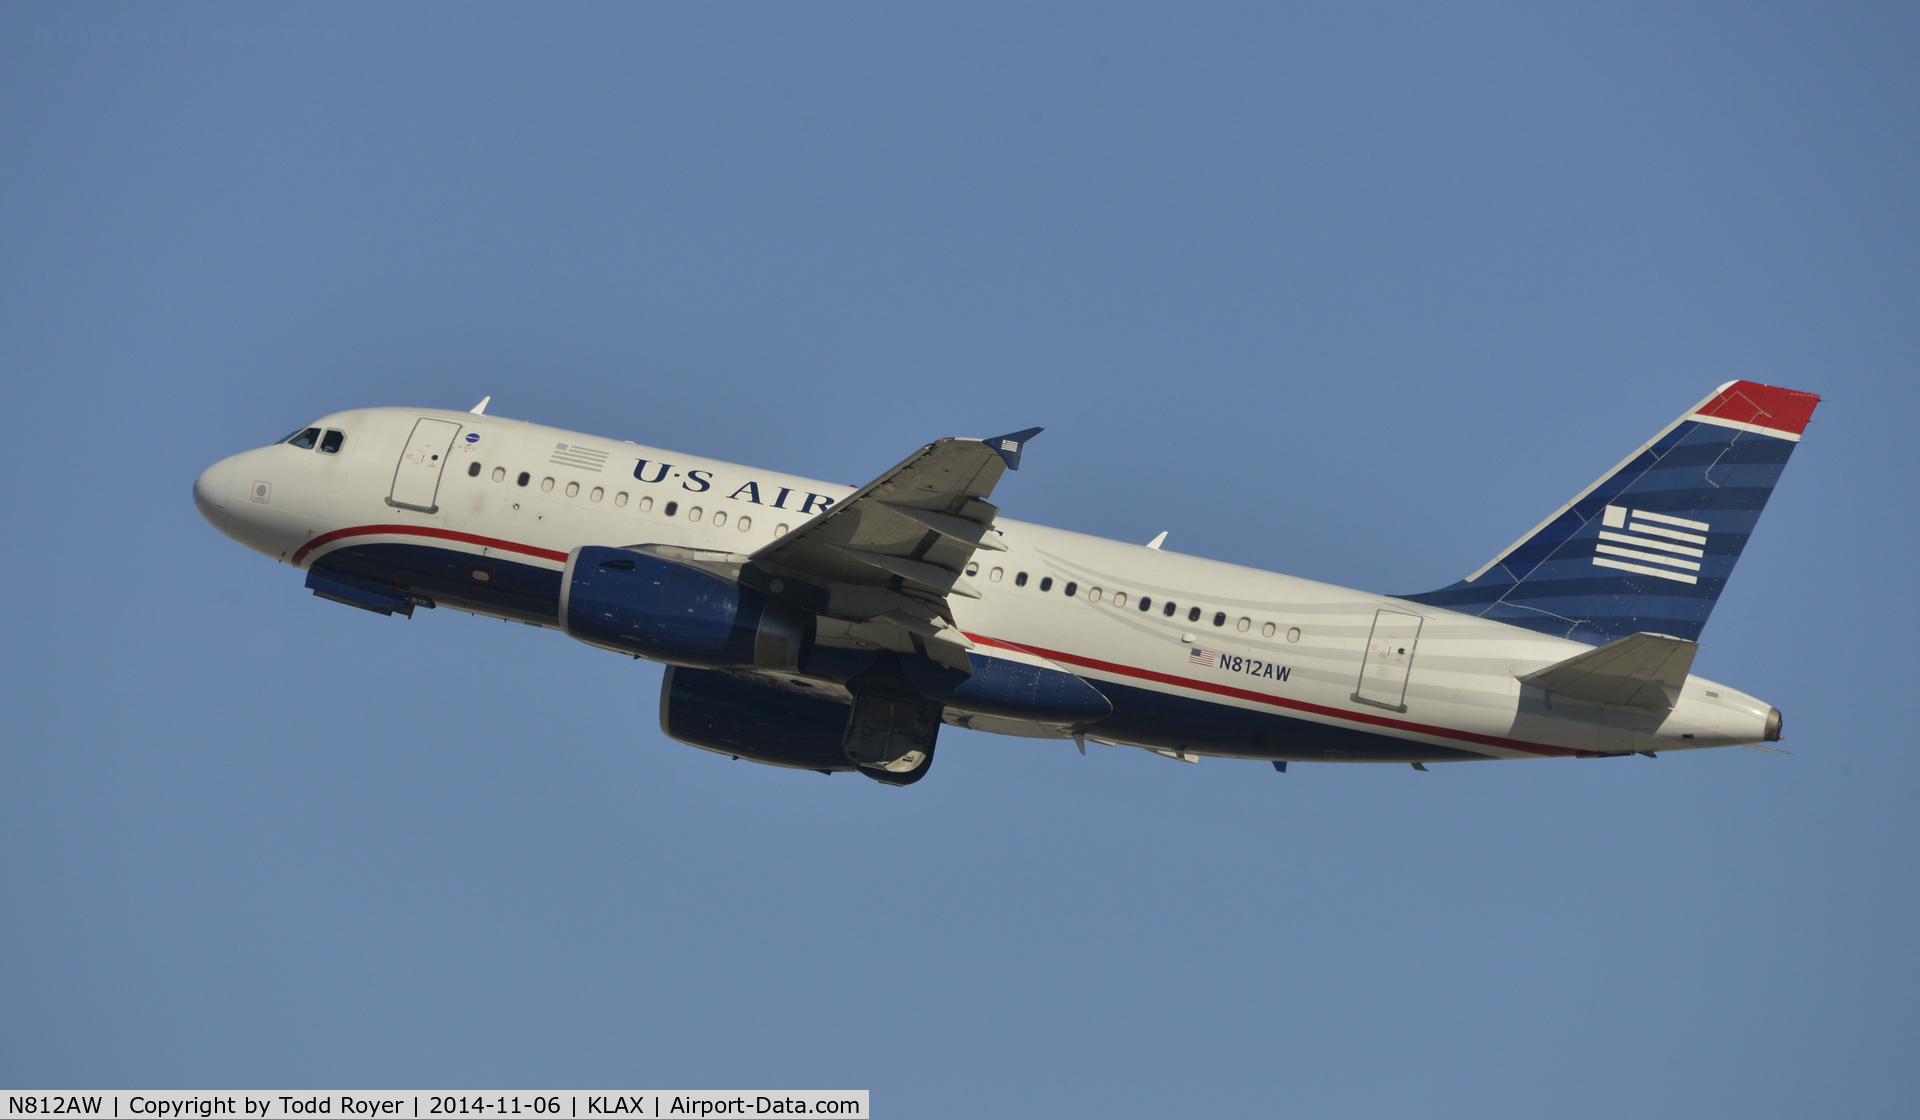 N812AW, 2000 Airbus A319-132 C/N 1178, Departing LAX on 25R